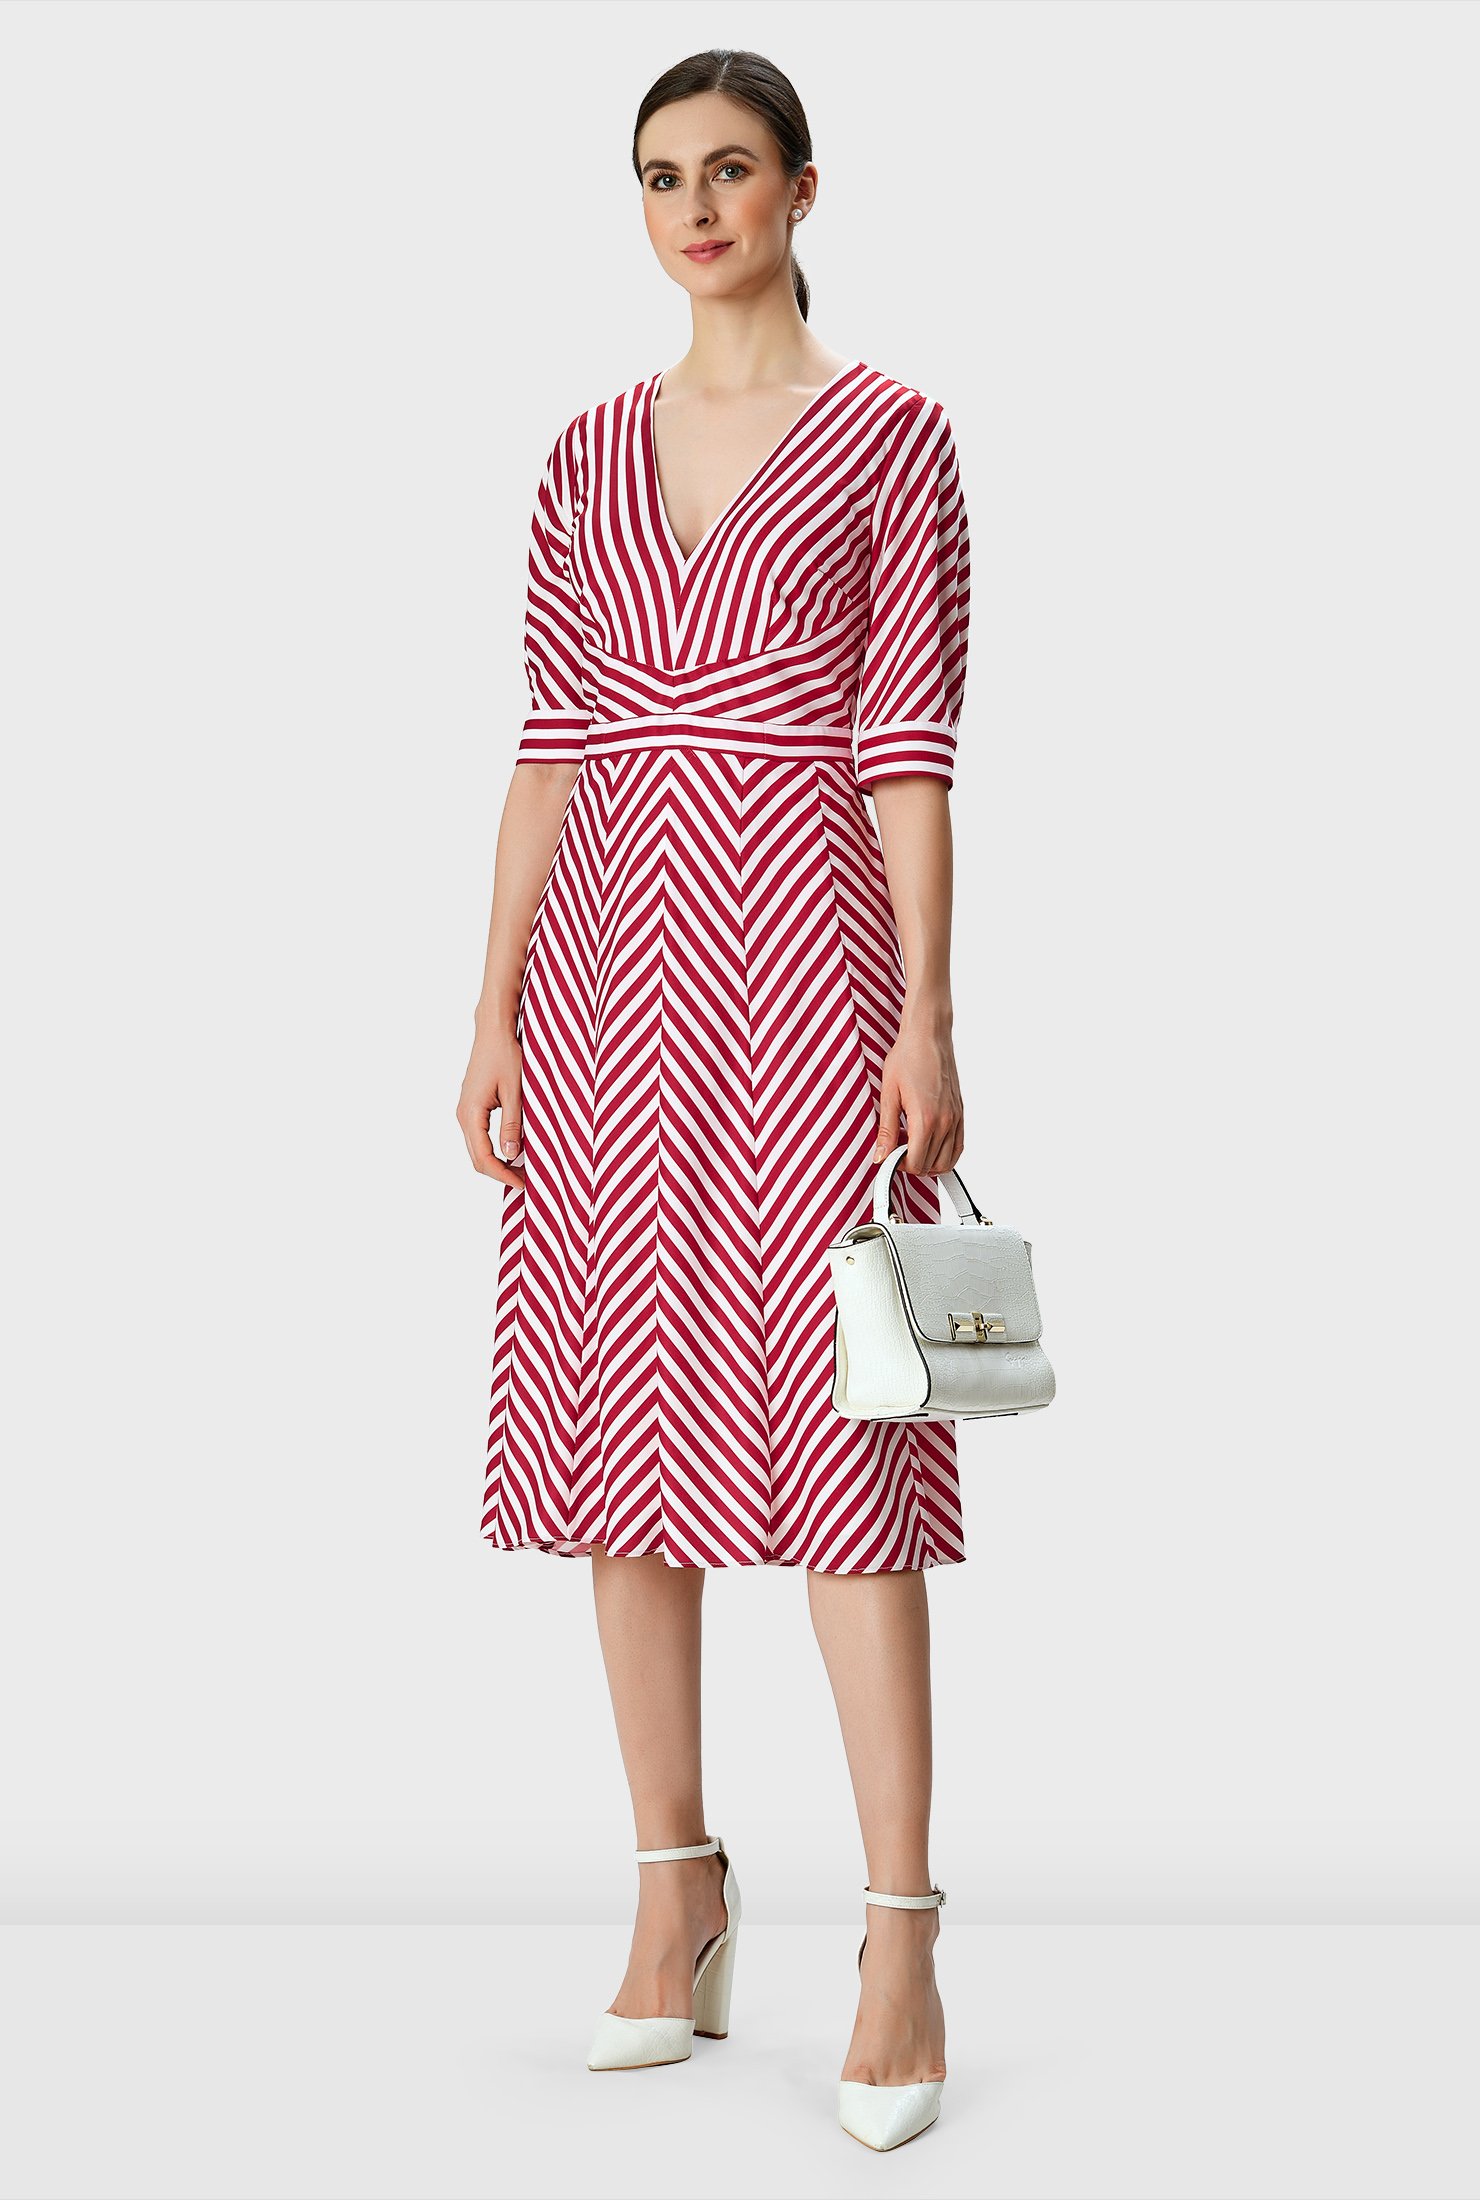 Warm spring days to summer evenings, our breezy multi-directional stripe print crepe dress for an optical illusion effect is styled with an empire bodice that flares out to a chevron stripe skirt.